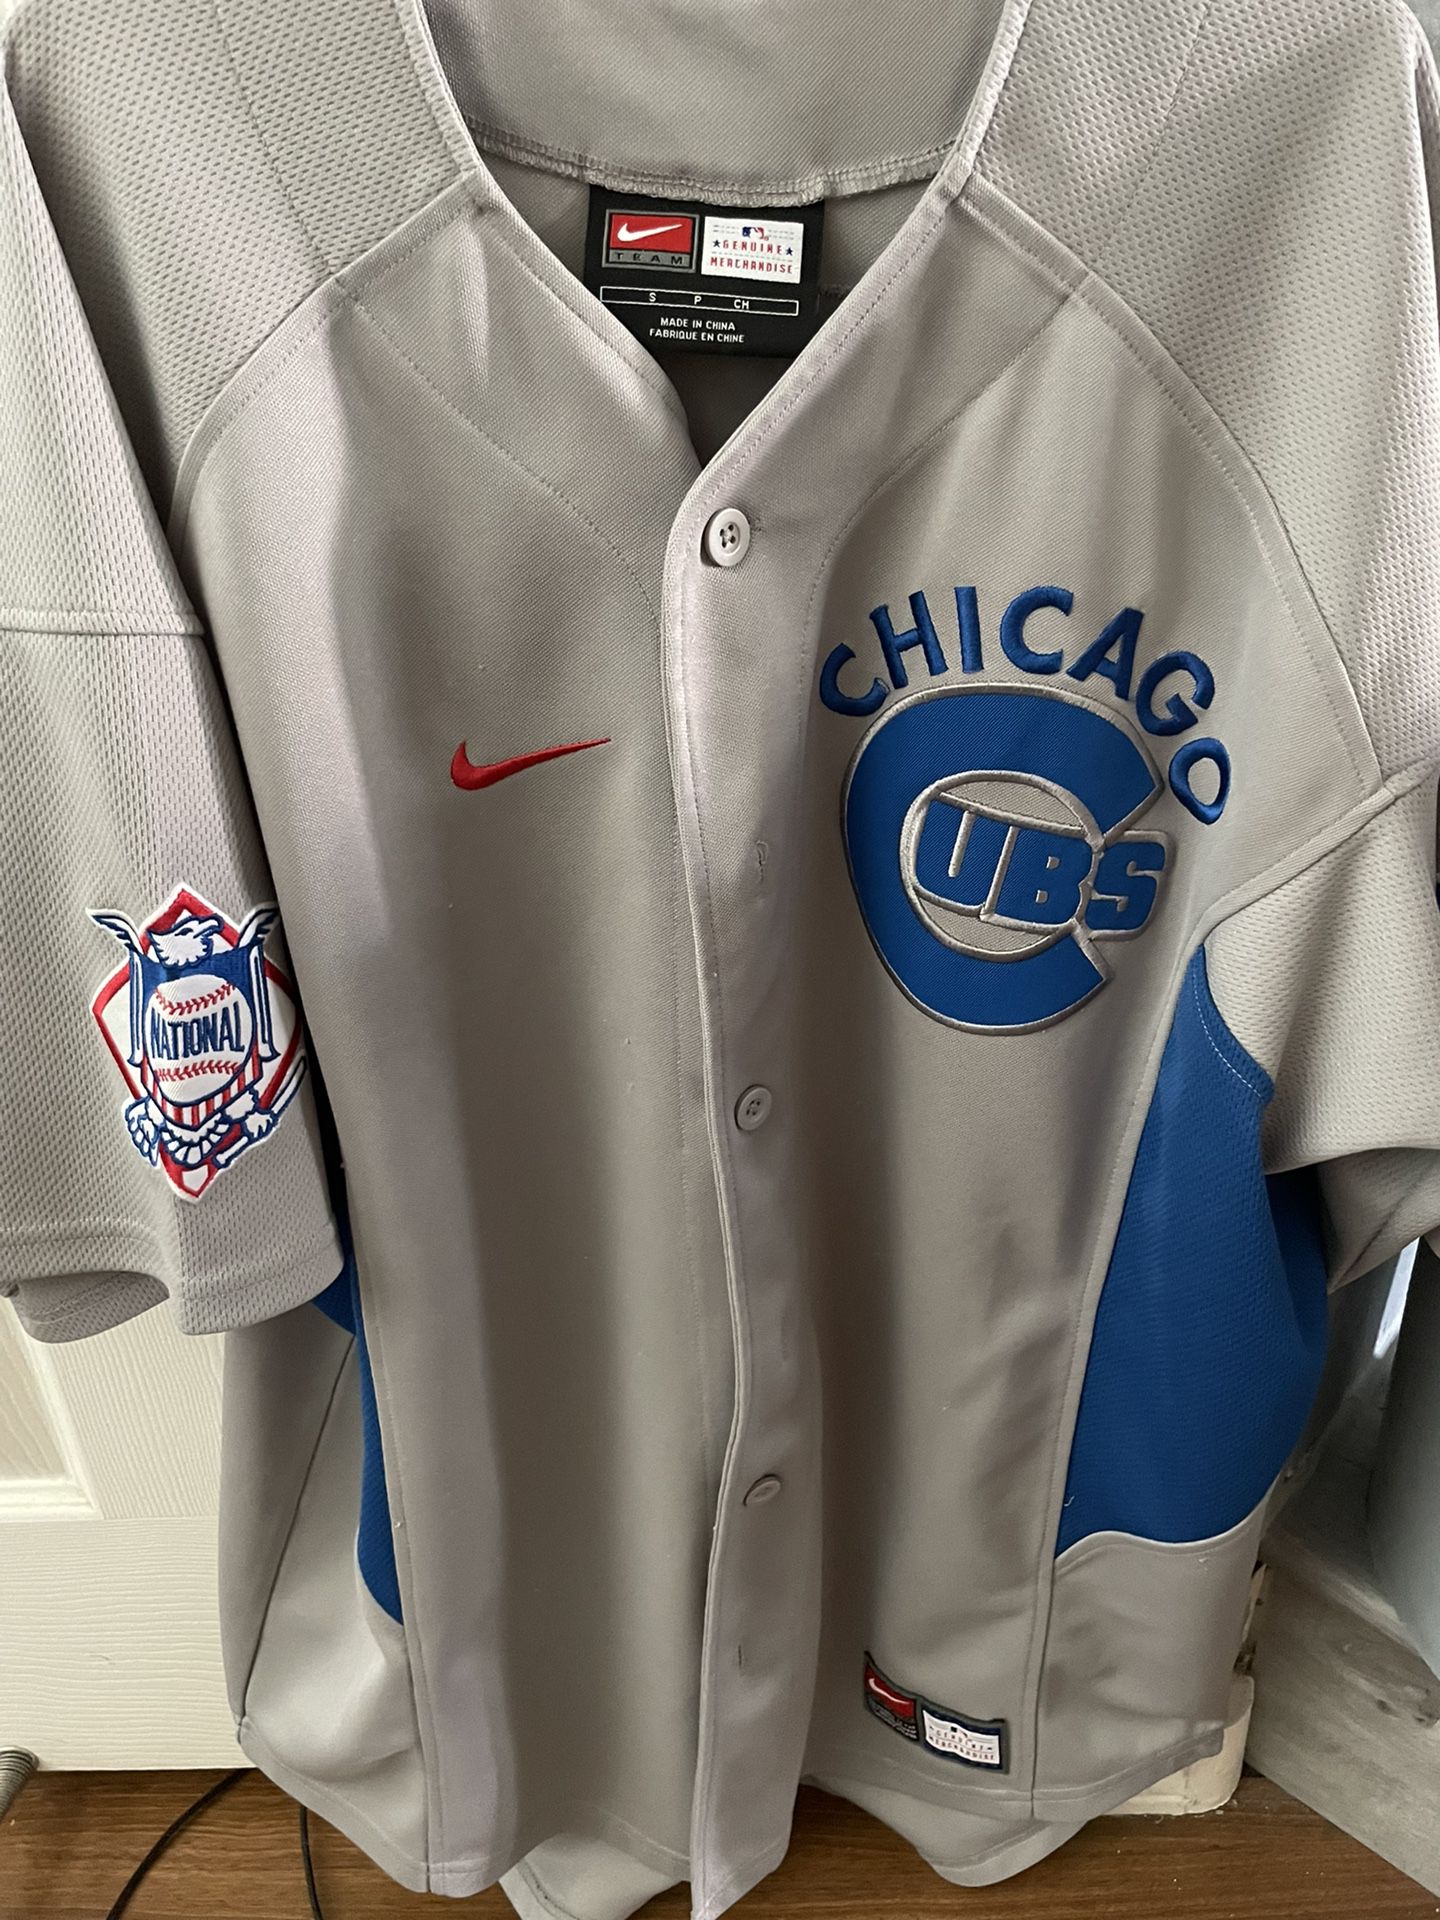 Chicago Cubs Sosa jersey